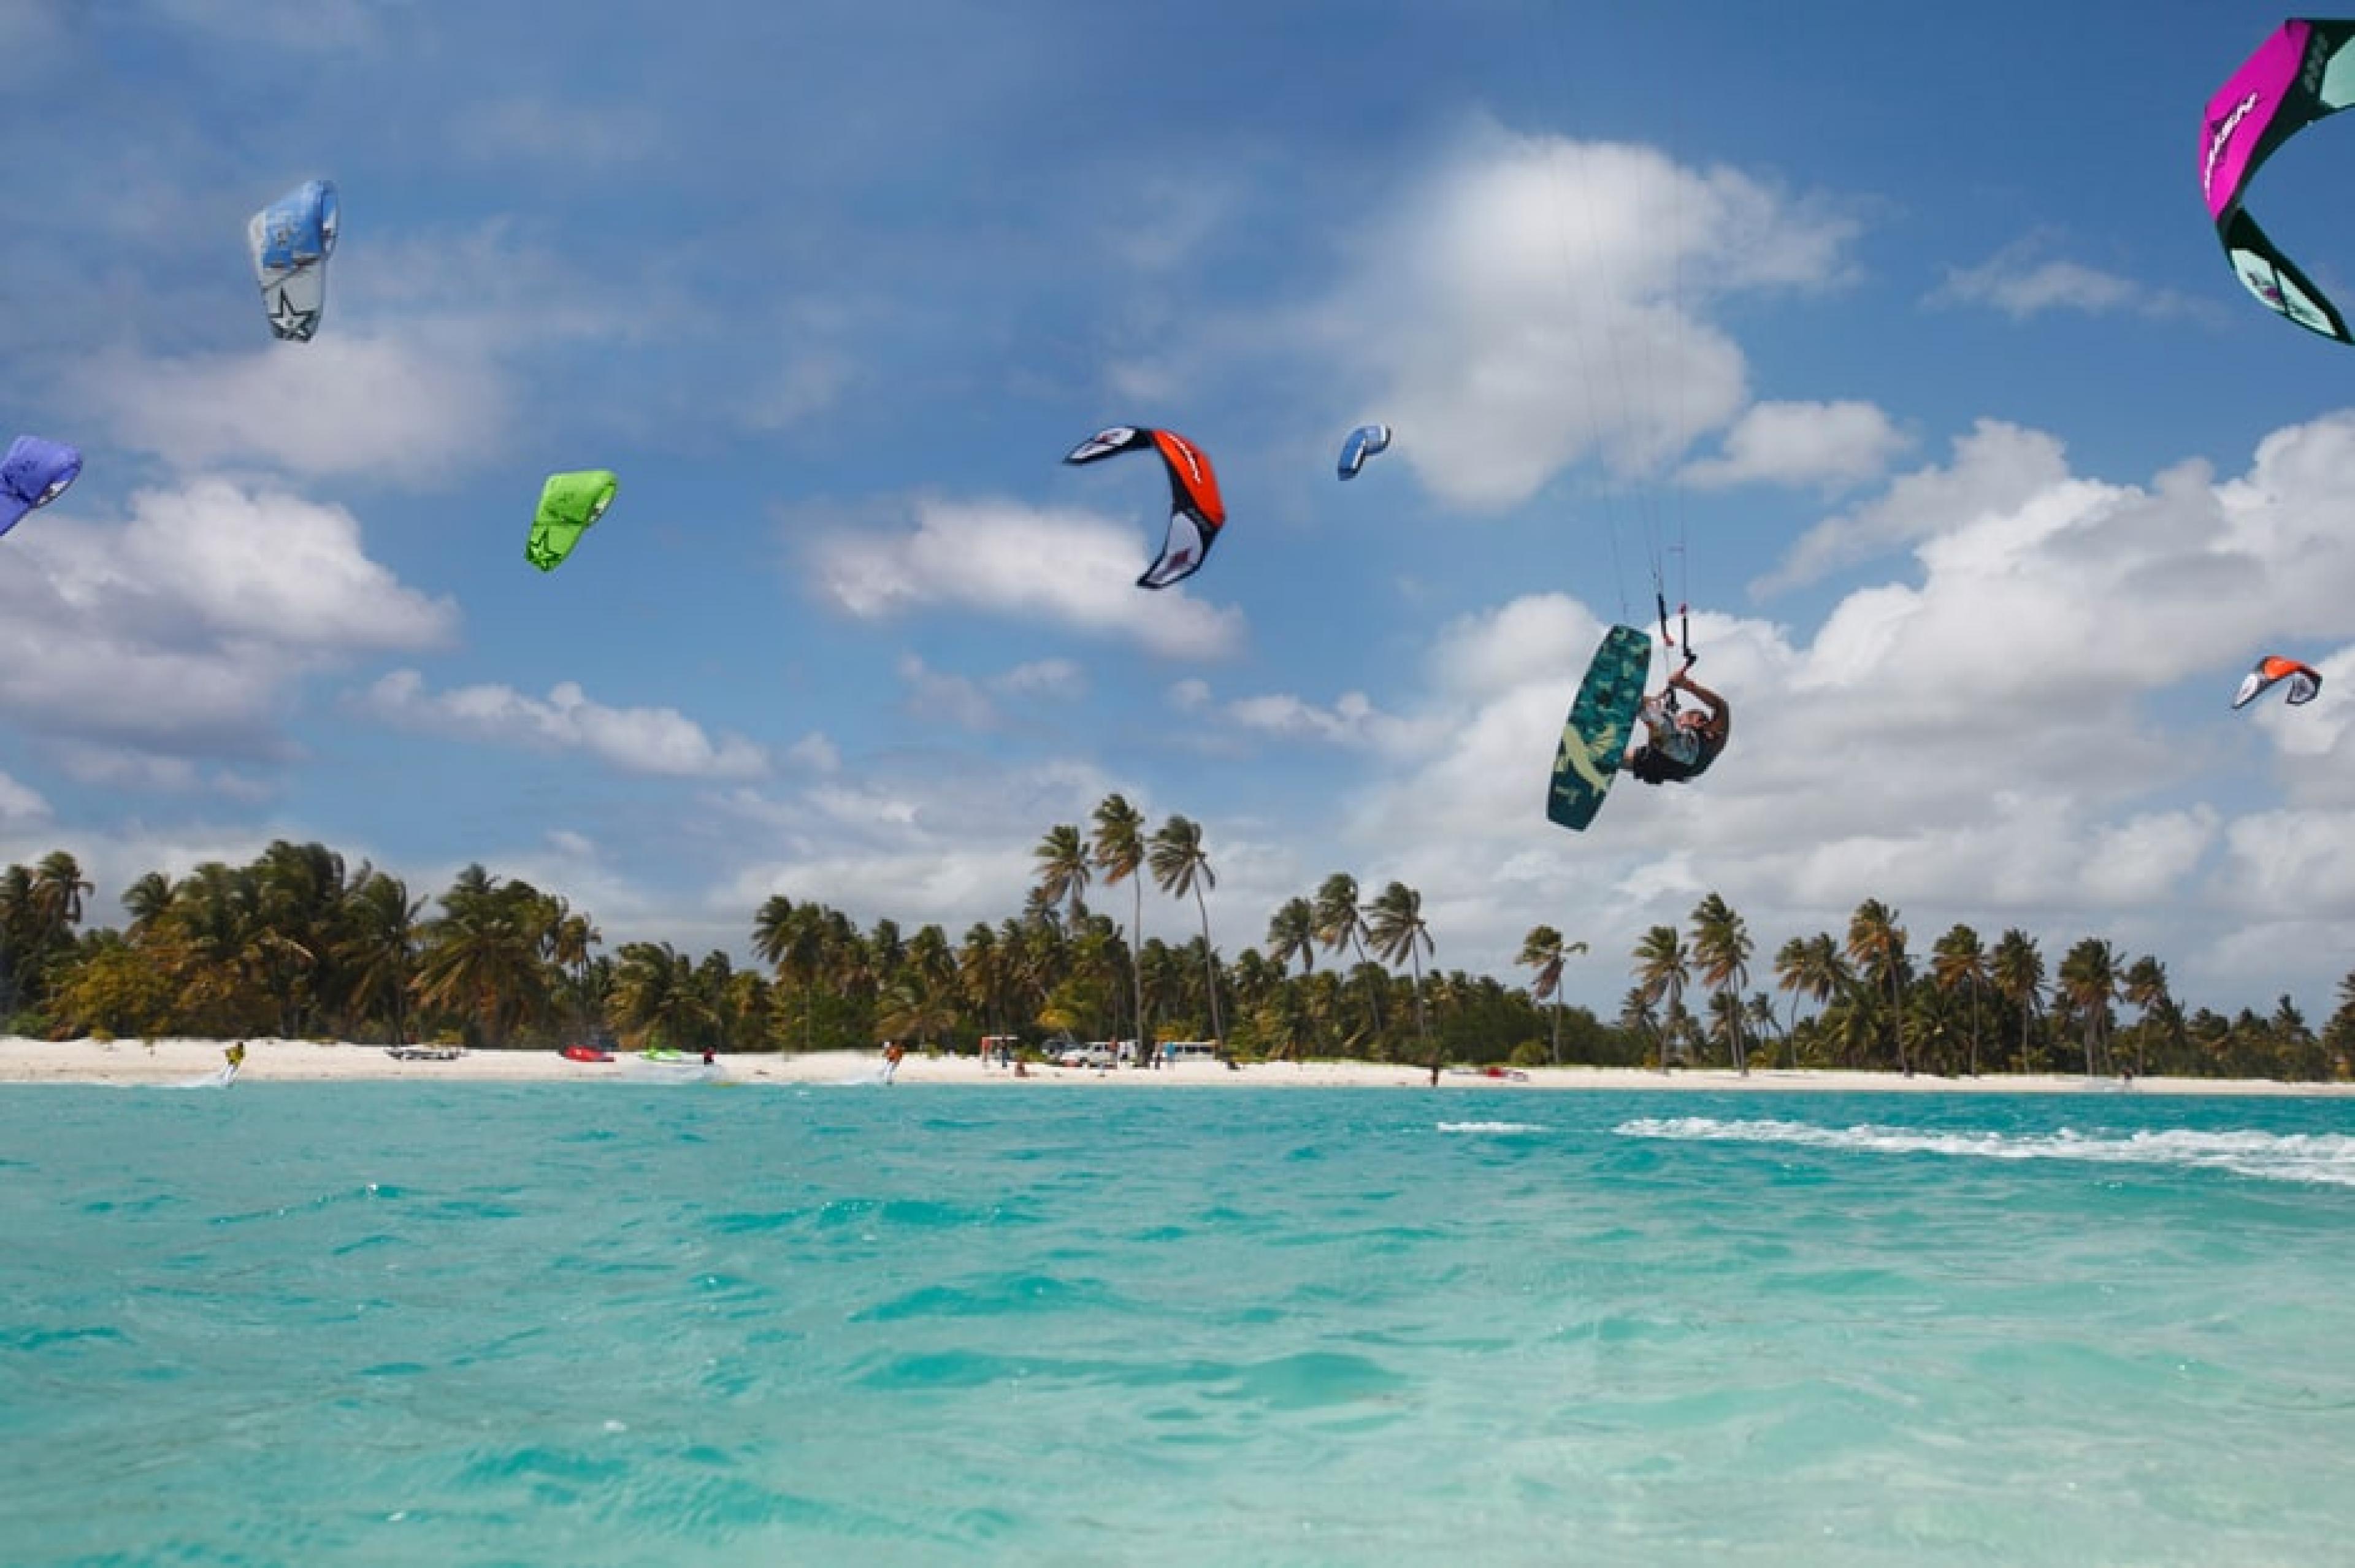 Aerial View-Kite-boarding ,Dominican Republic, Caribbean-Courtesy Domincan Republic Ministry of Tourism